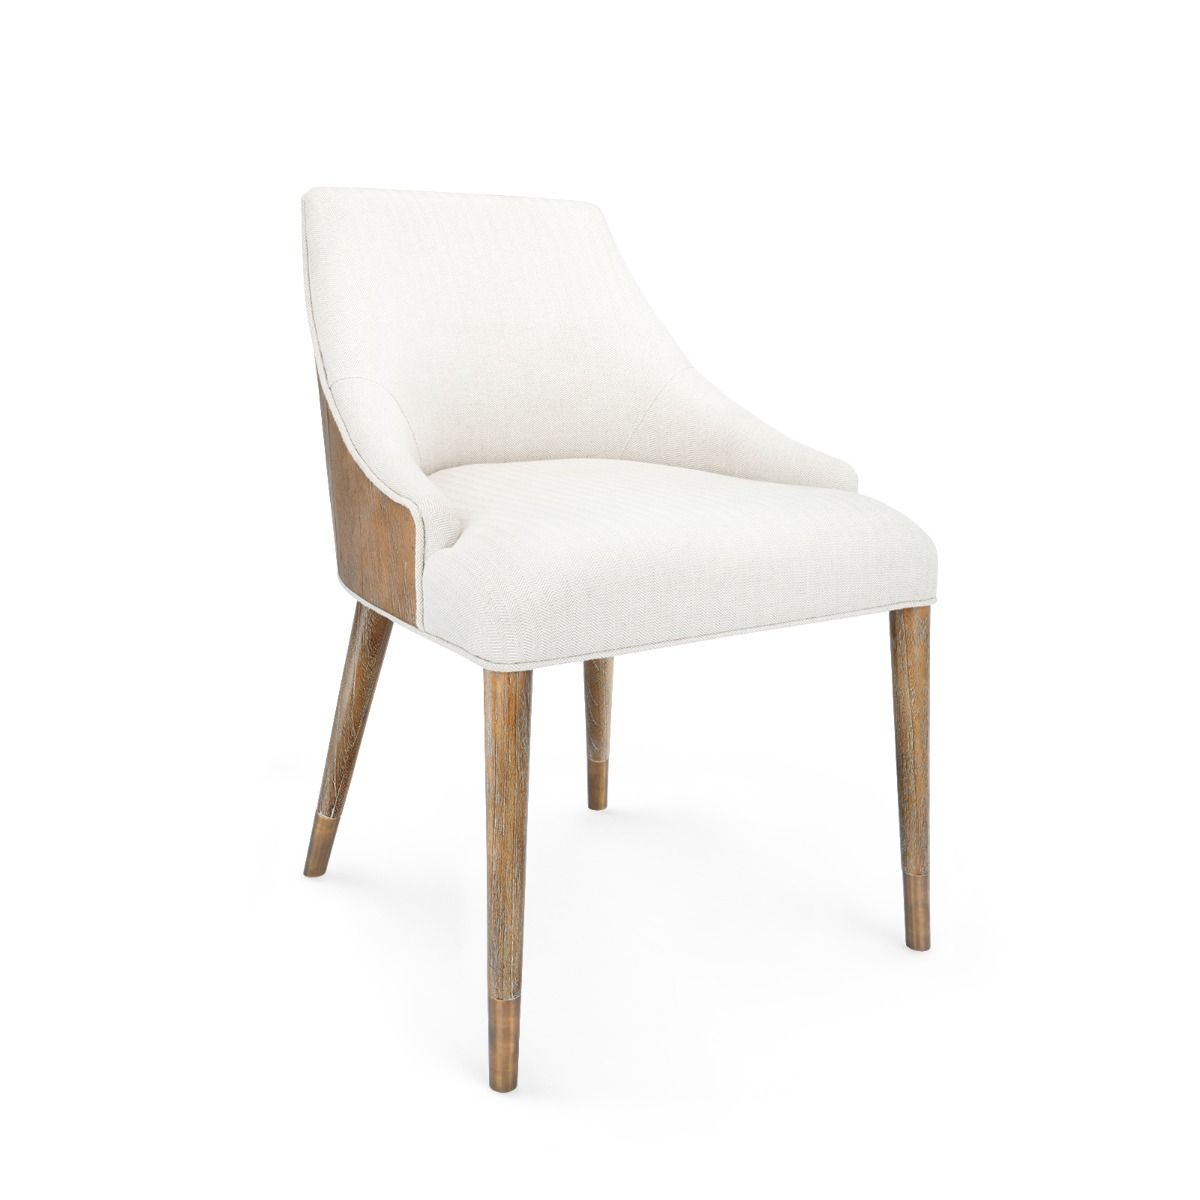 Load image into Gallery viewer, Orion Armchair, Driftwood Dining Chair Bungalow 5     Four Hands, Burke Decor, Mid Century Modern Furniture, Old Bones Furniture Company, Old Bones Co, Modern Mid Century, Designer Furniture, https://www.oldbonesco.com/
